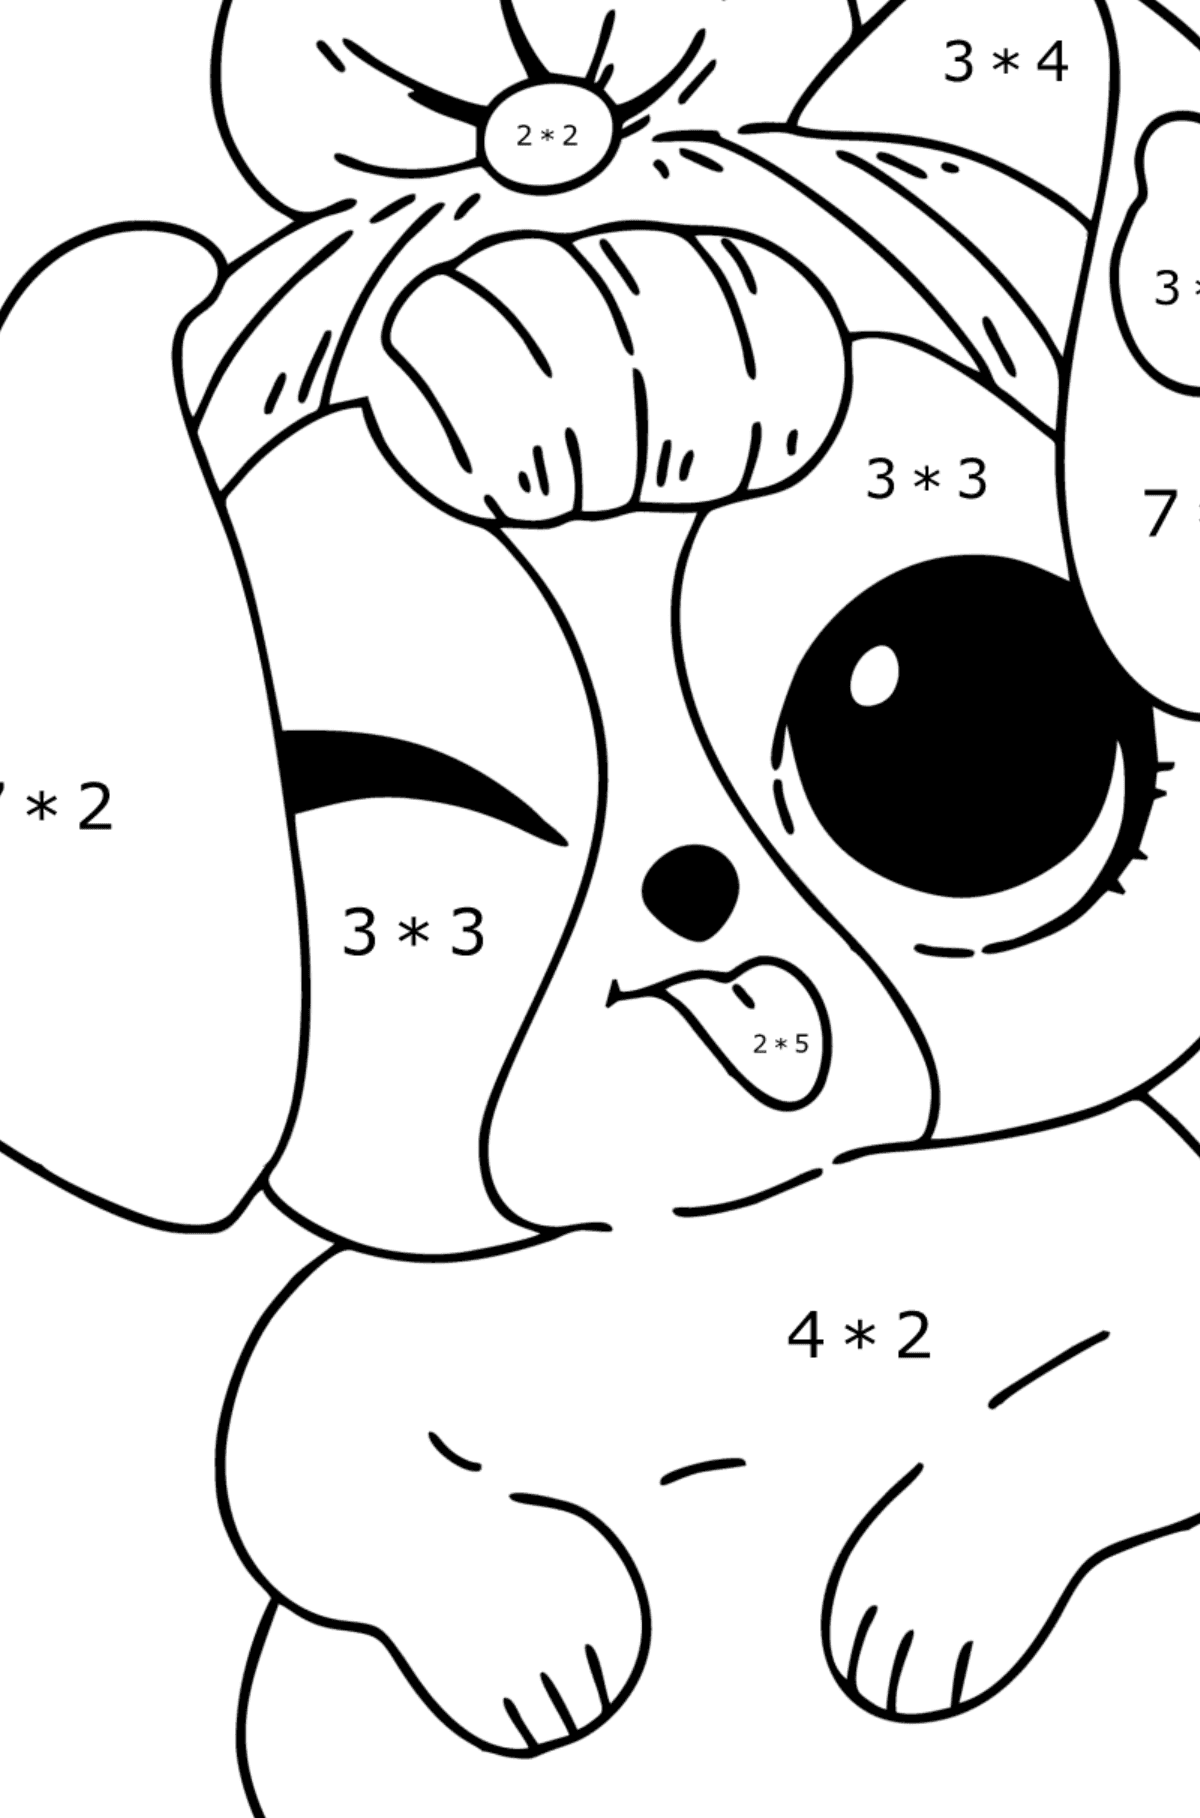 Coloring page LOL pet cute puppy - Math Coloring - Multiplication for Kids